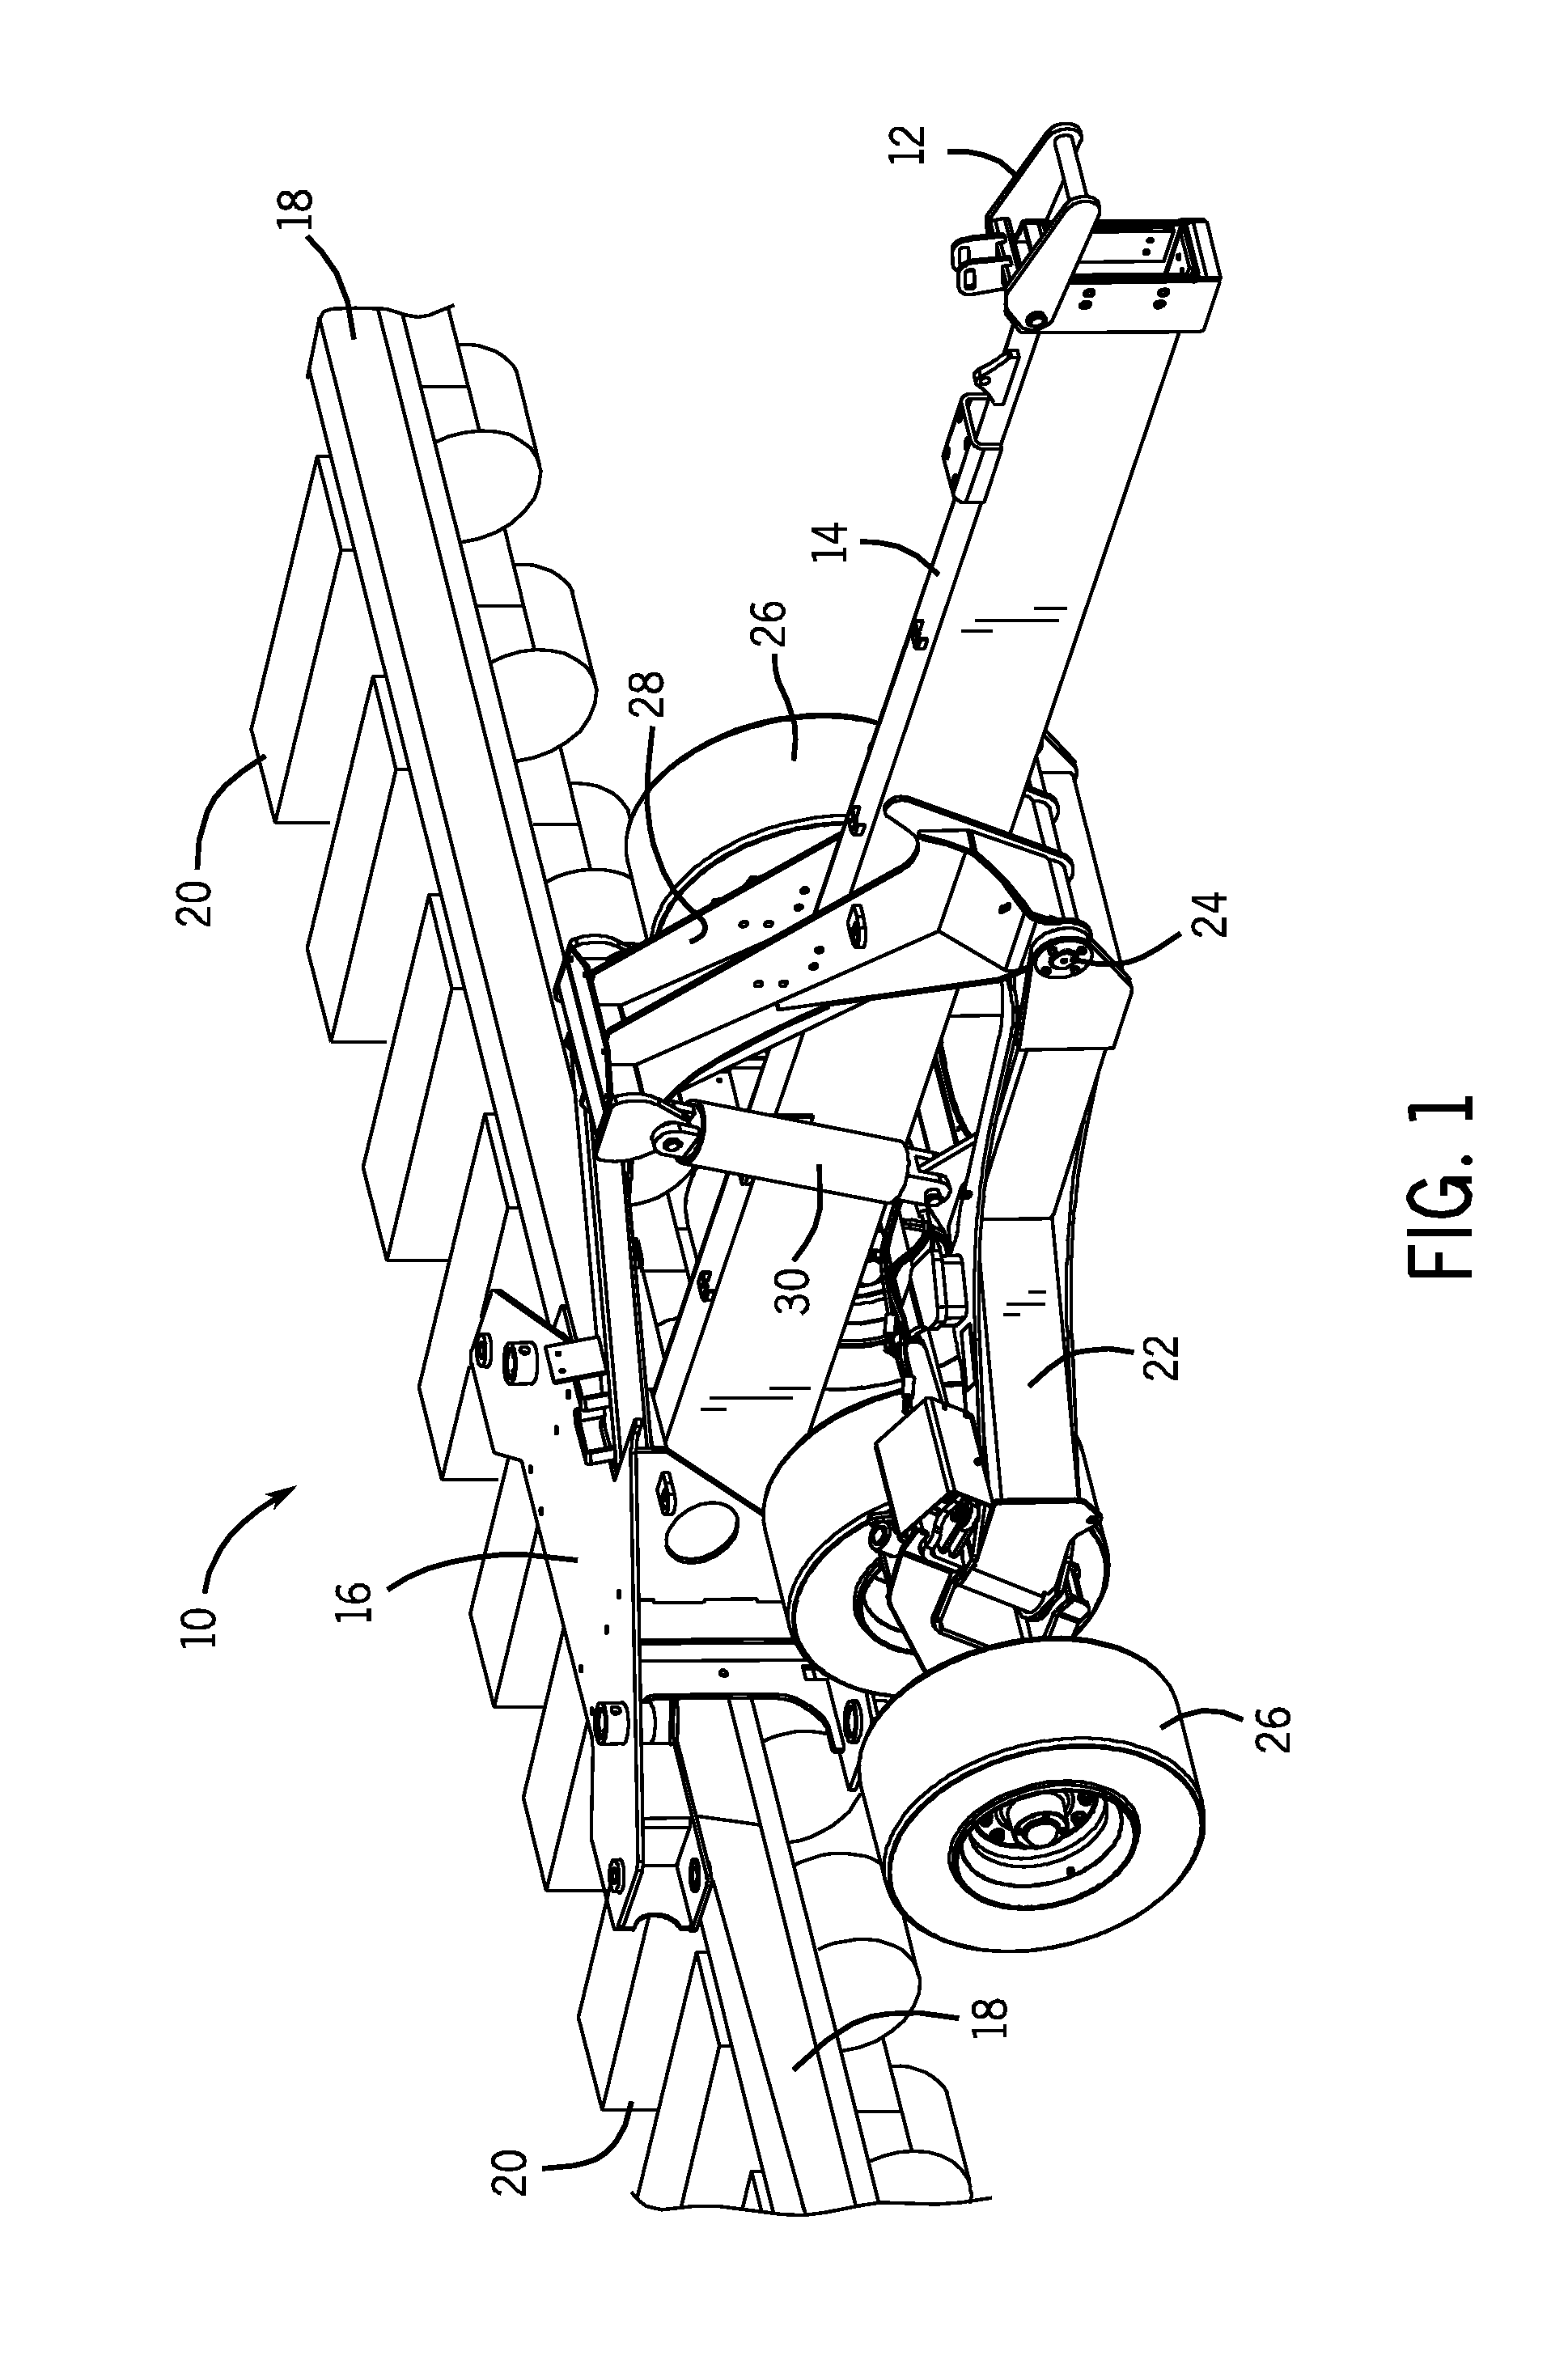 Fluid control system for steerable agricultural implement